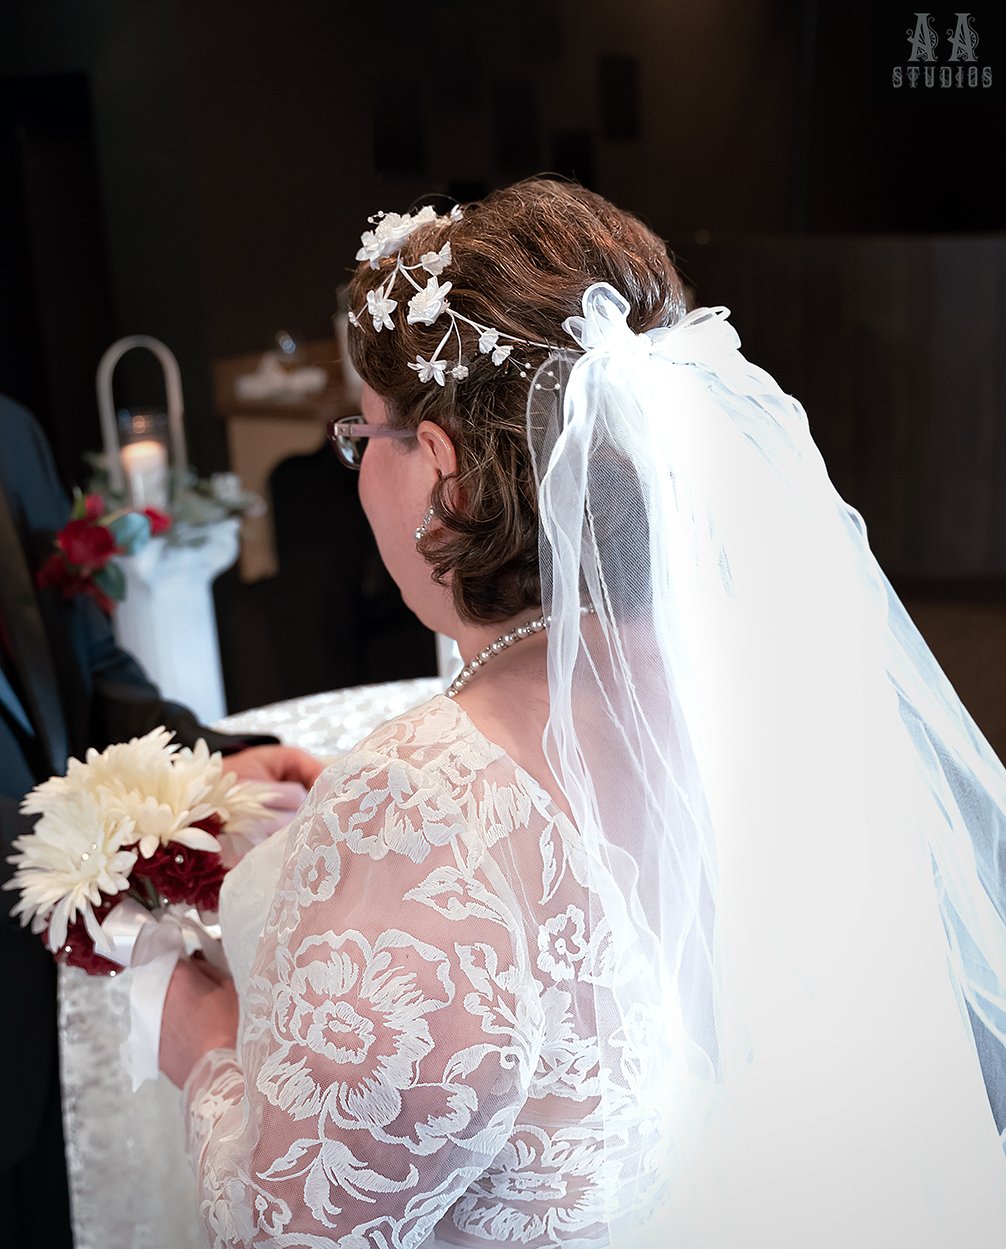 Small wedding ceremony photography in Lansing Michigan